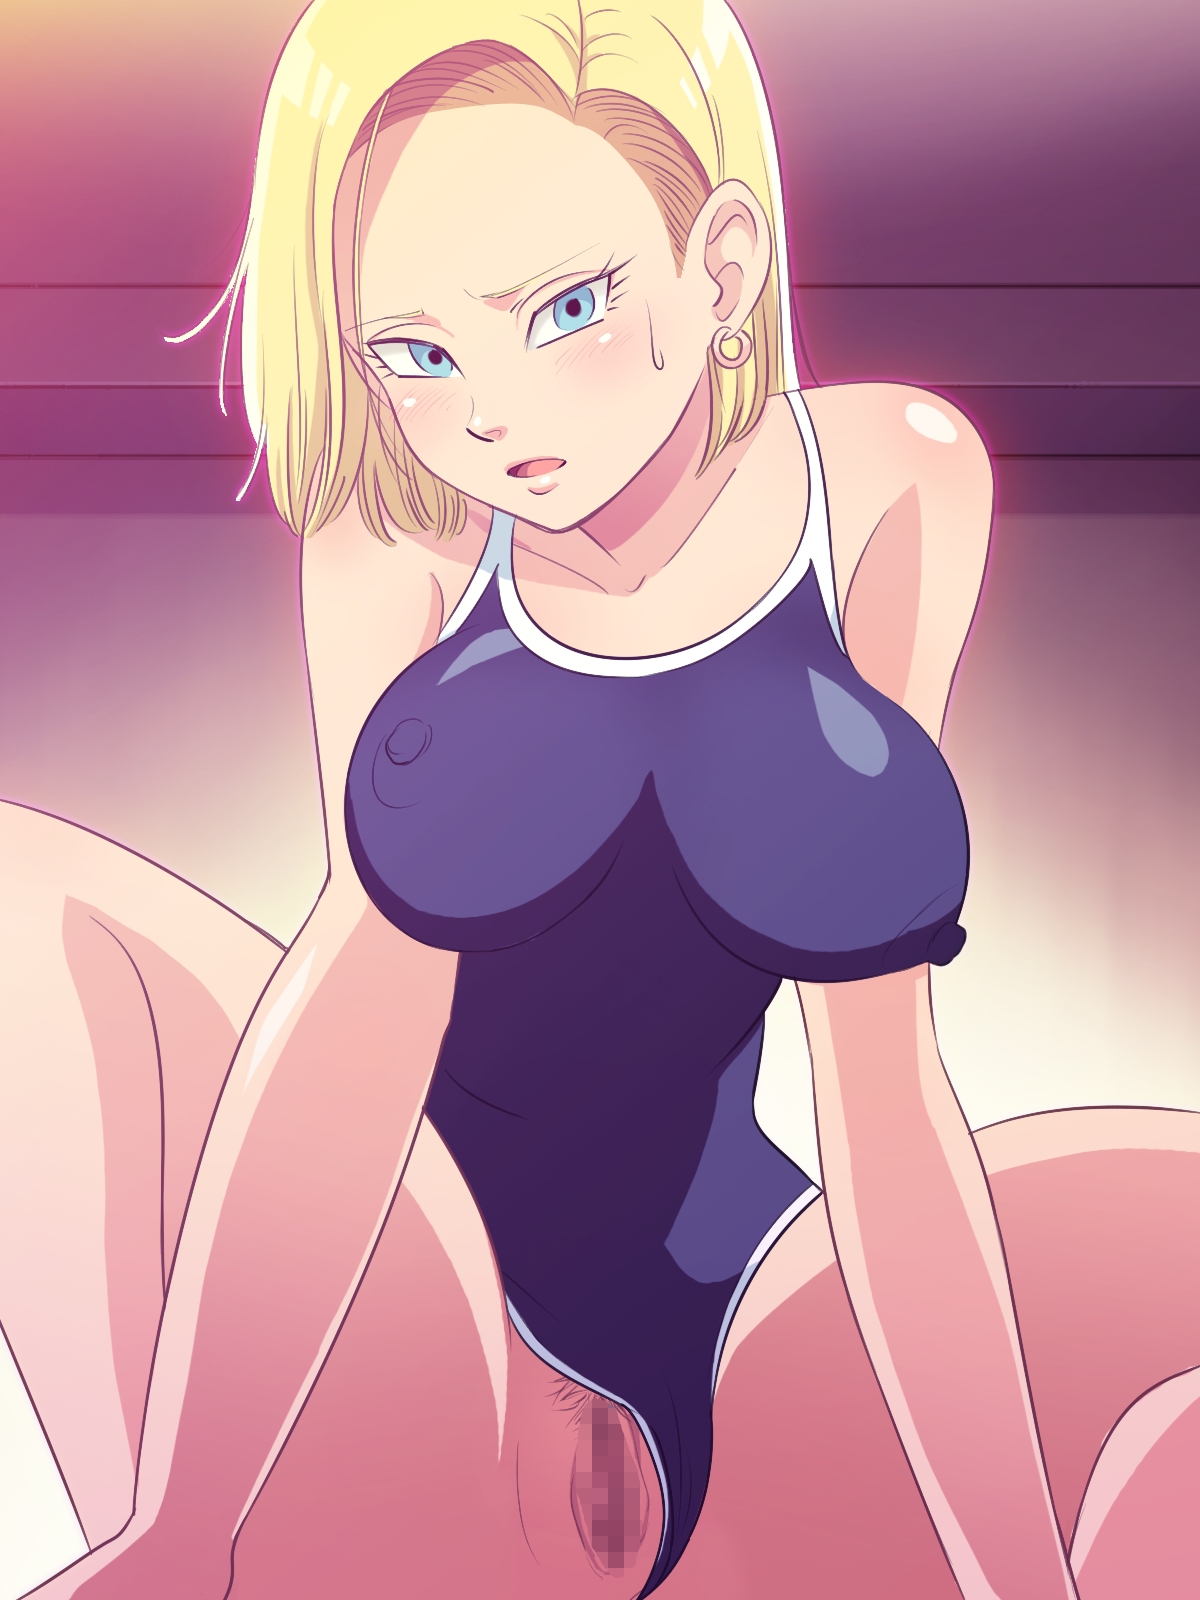 498426 - Android_18 Dragon_ball_Z